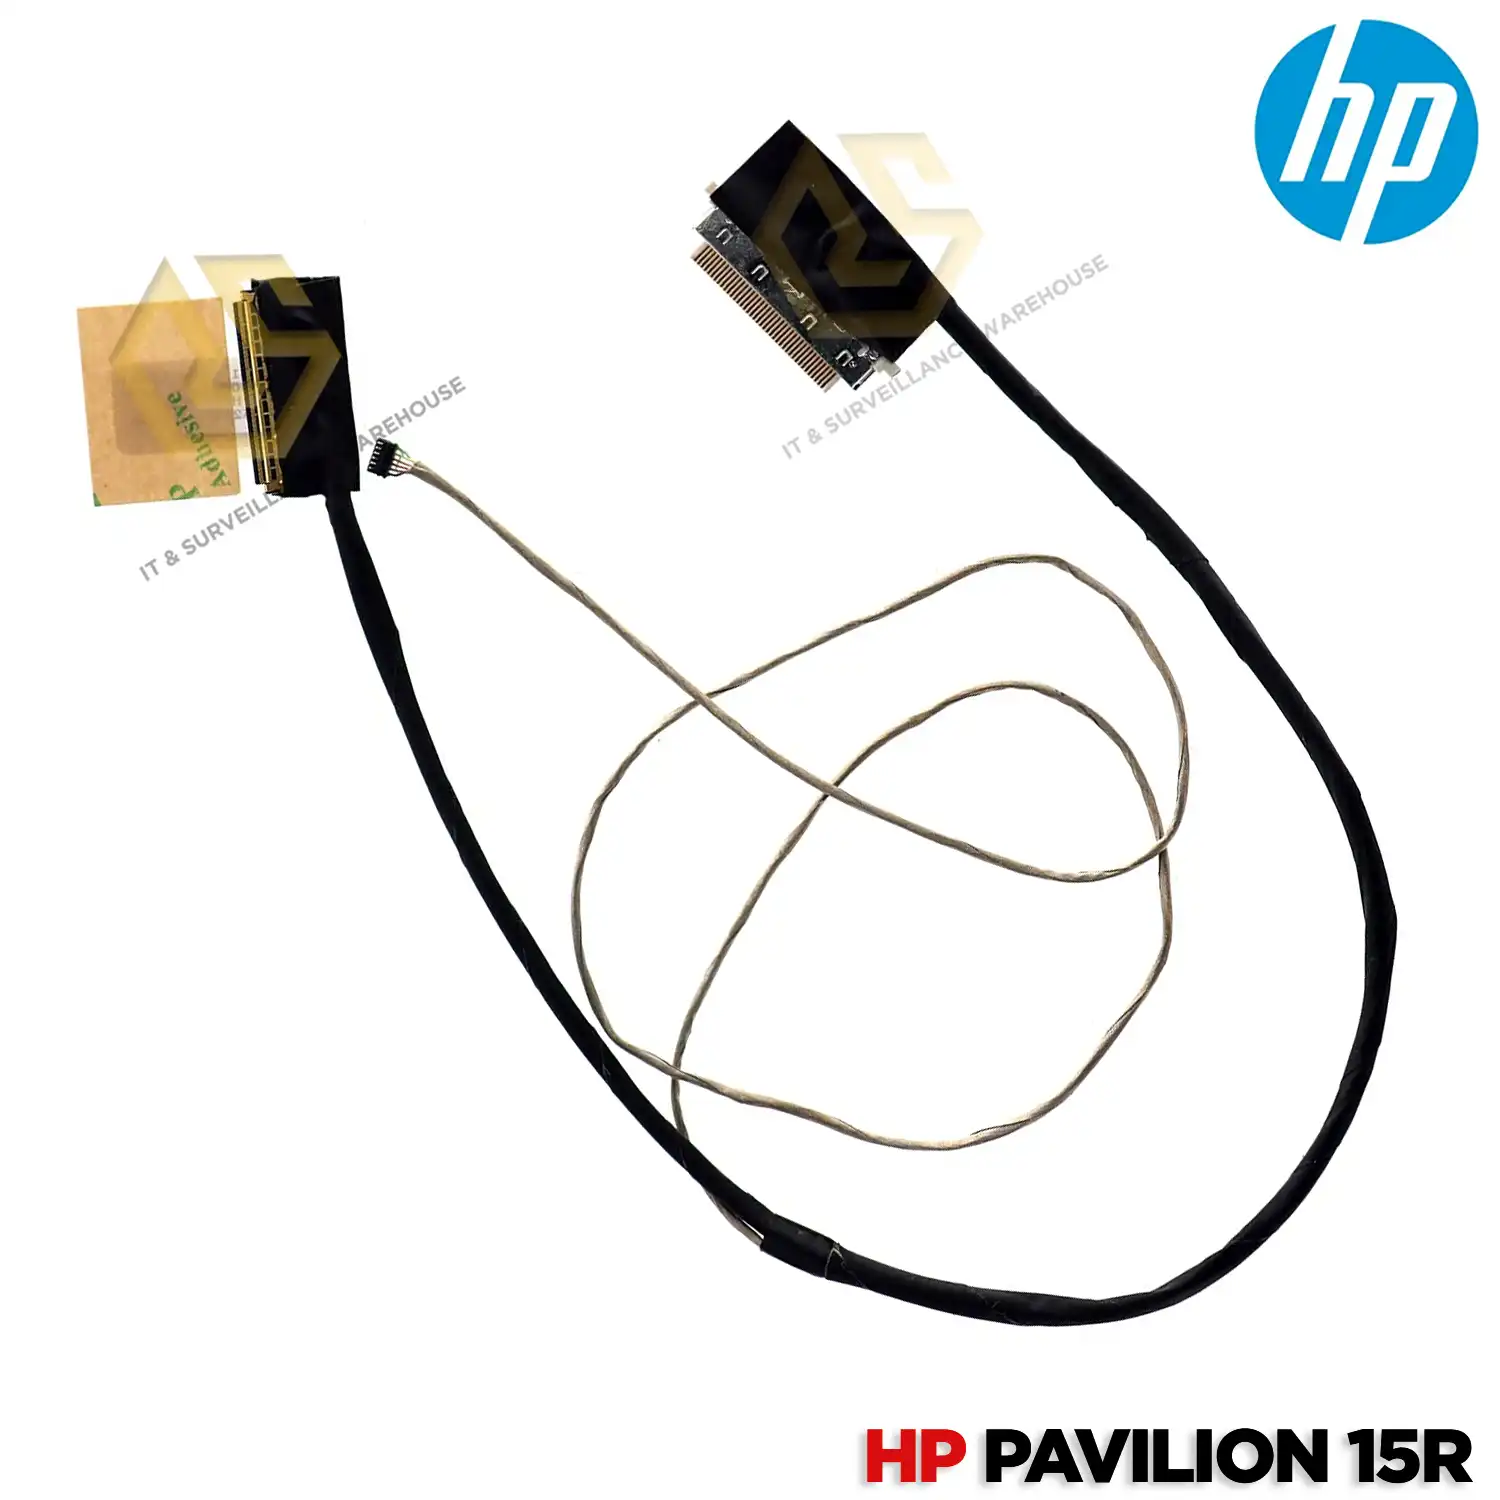 LAPTOP DISPLAY CABLE FOR HP COMPAQ 15R | 15-G | 15G | G3 | 255 | G3